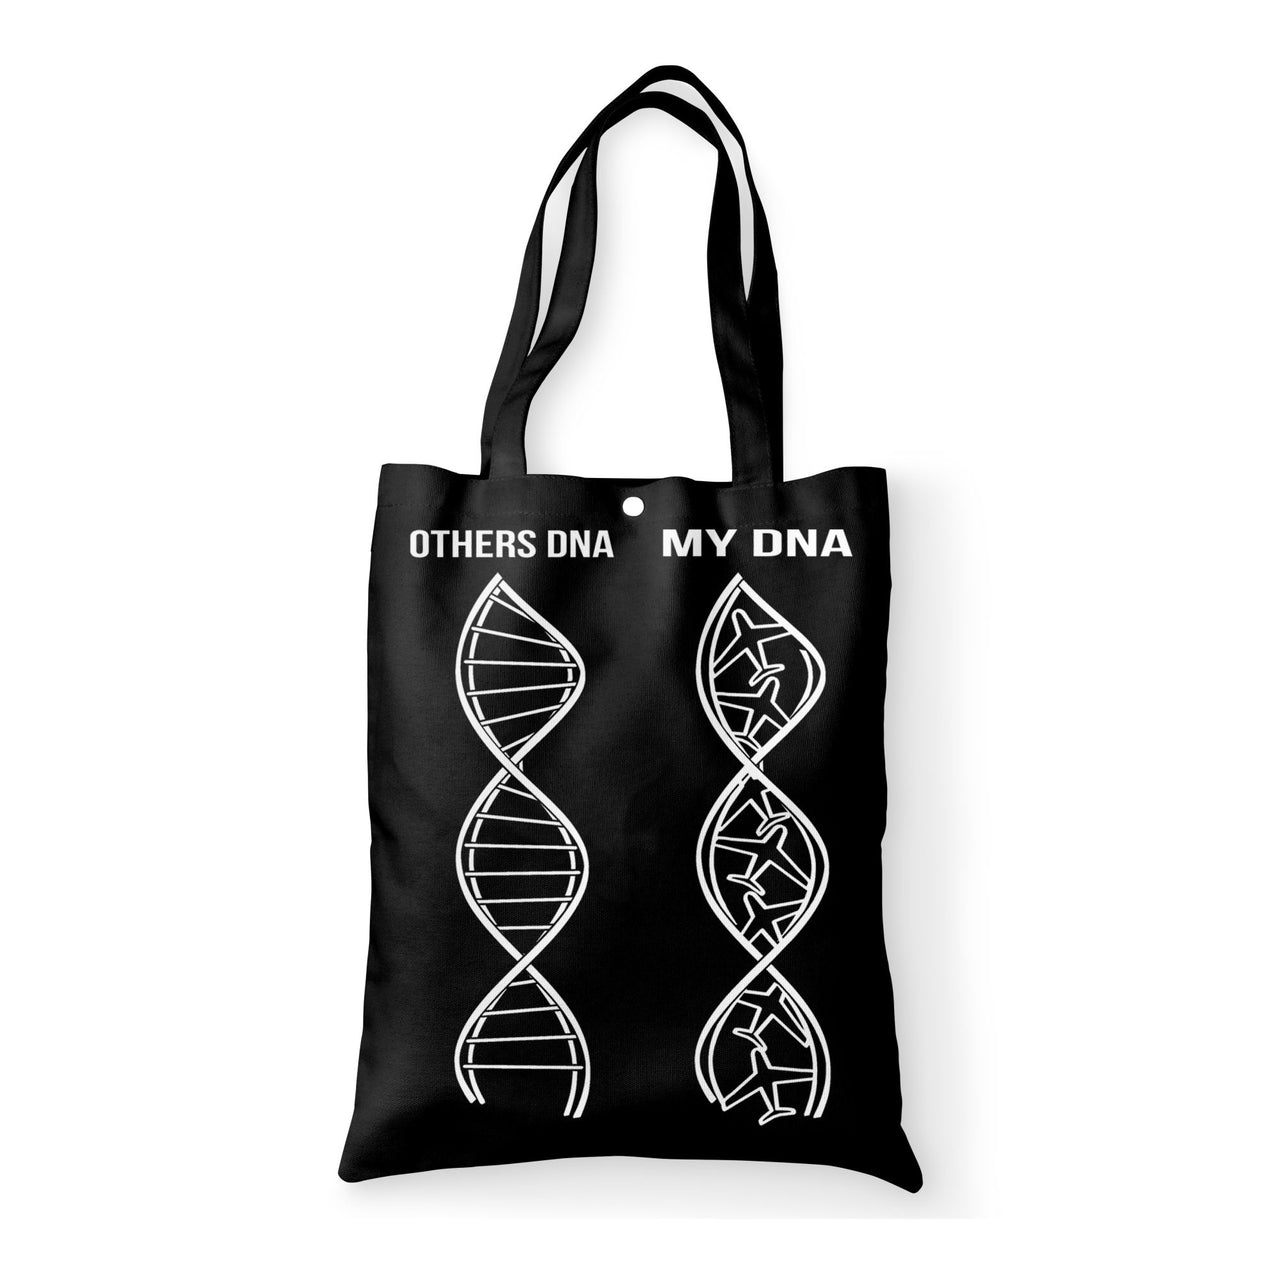 Aviation DNA Designed Tote Bags